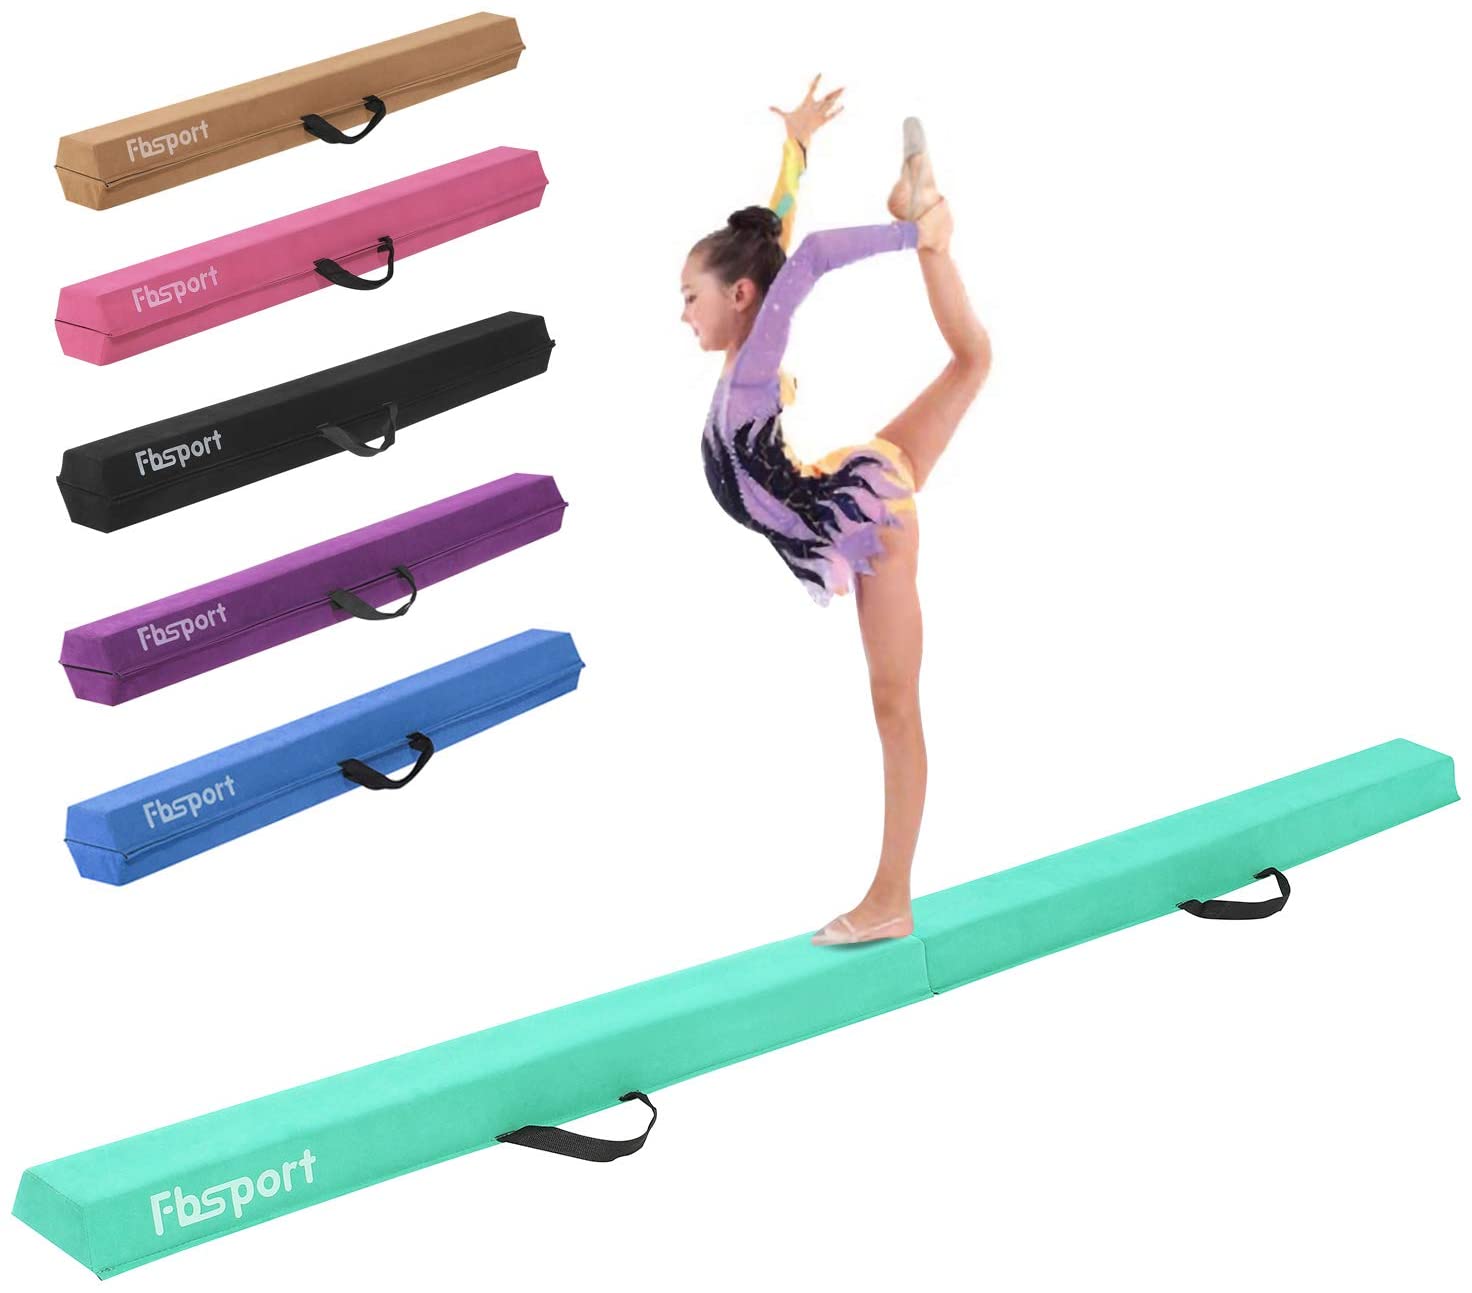 FC FUNCHEER 6FT/9FT Folding Floor Gymnastics Beam for Kids,Non Slip Rubber Base Waterproof Leather Covering Gymnastics Beam for Training,Professional Home Training with Carrying Bag